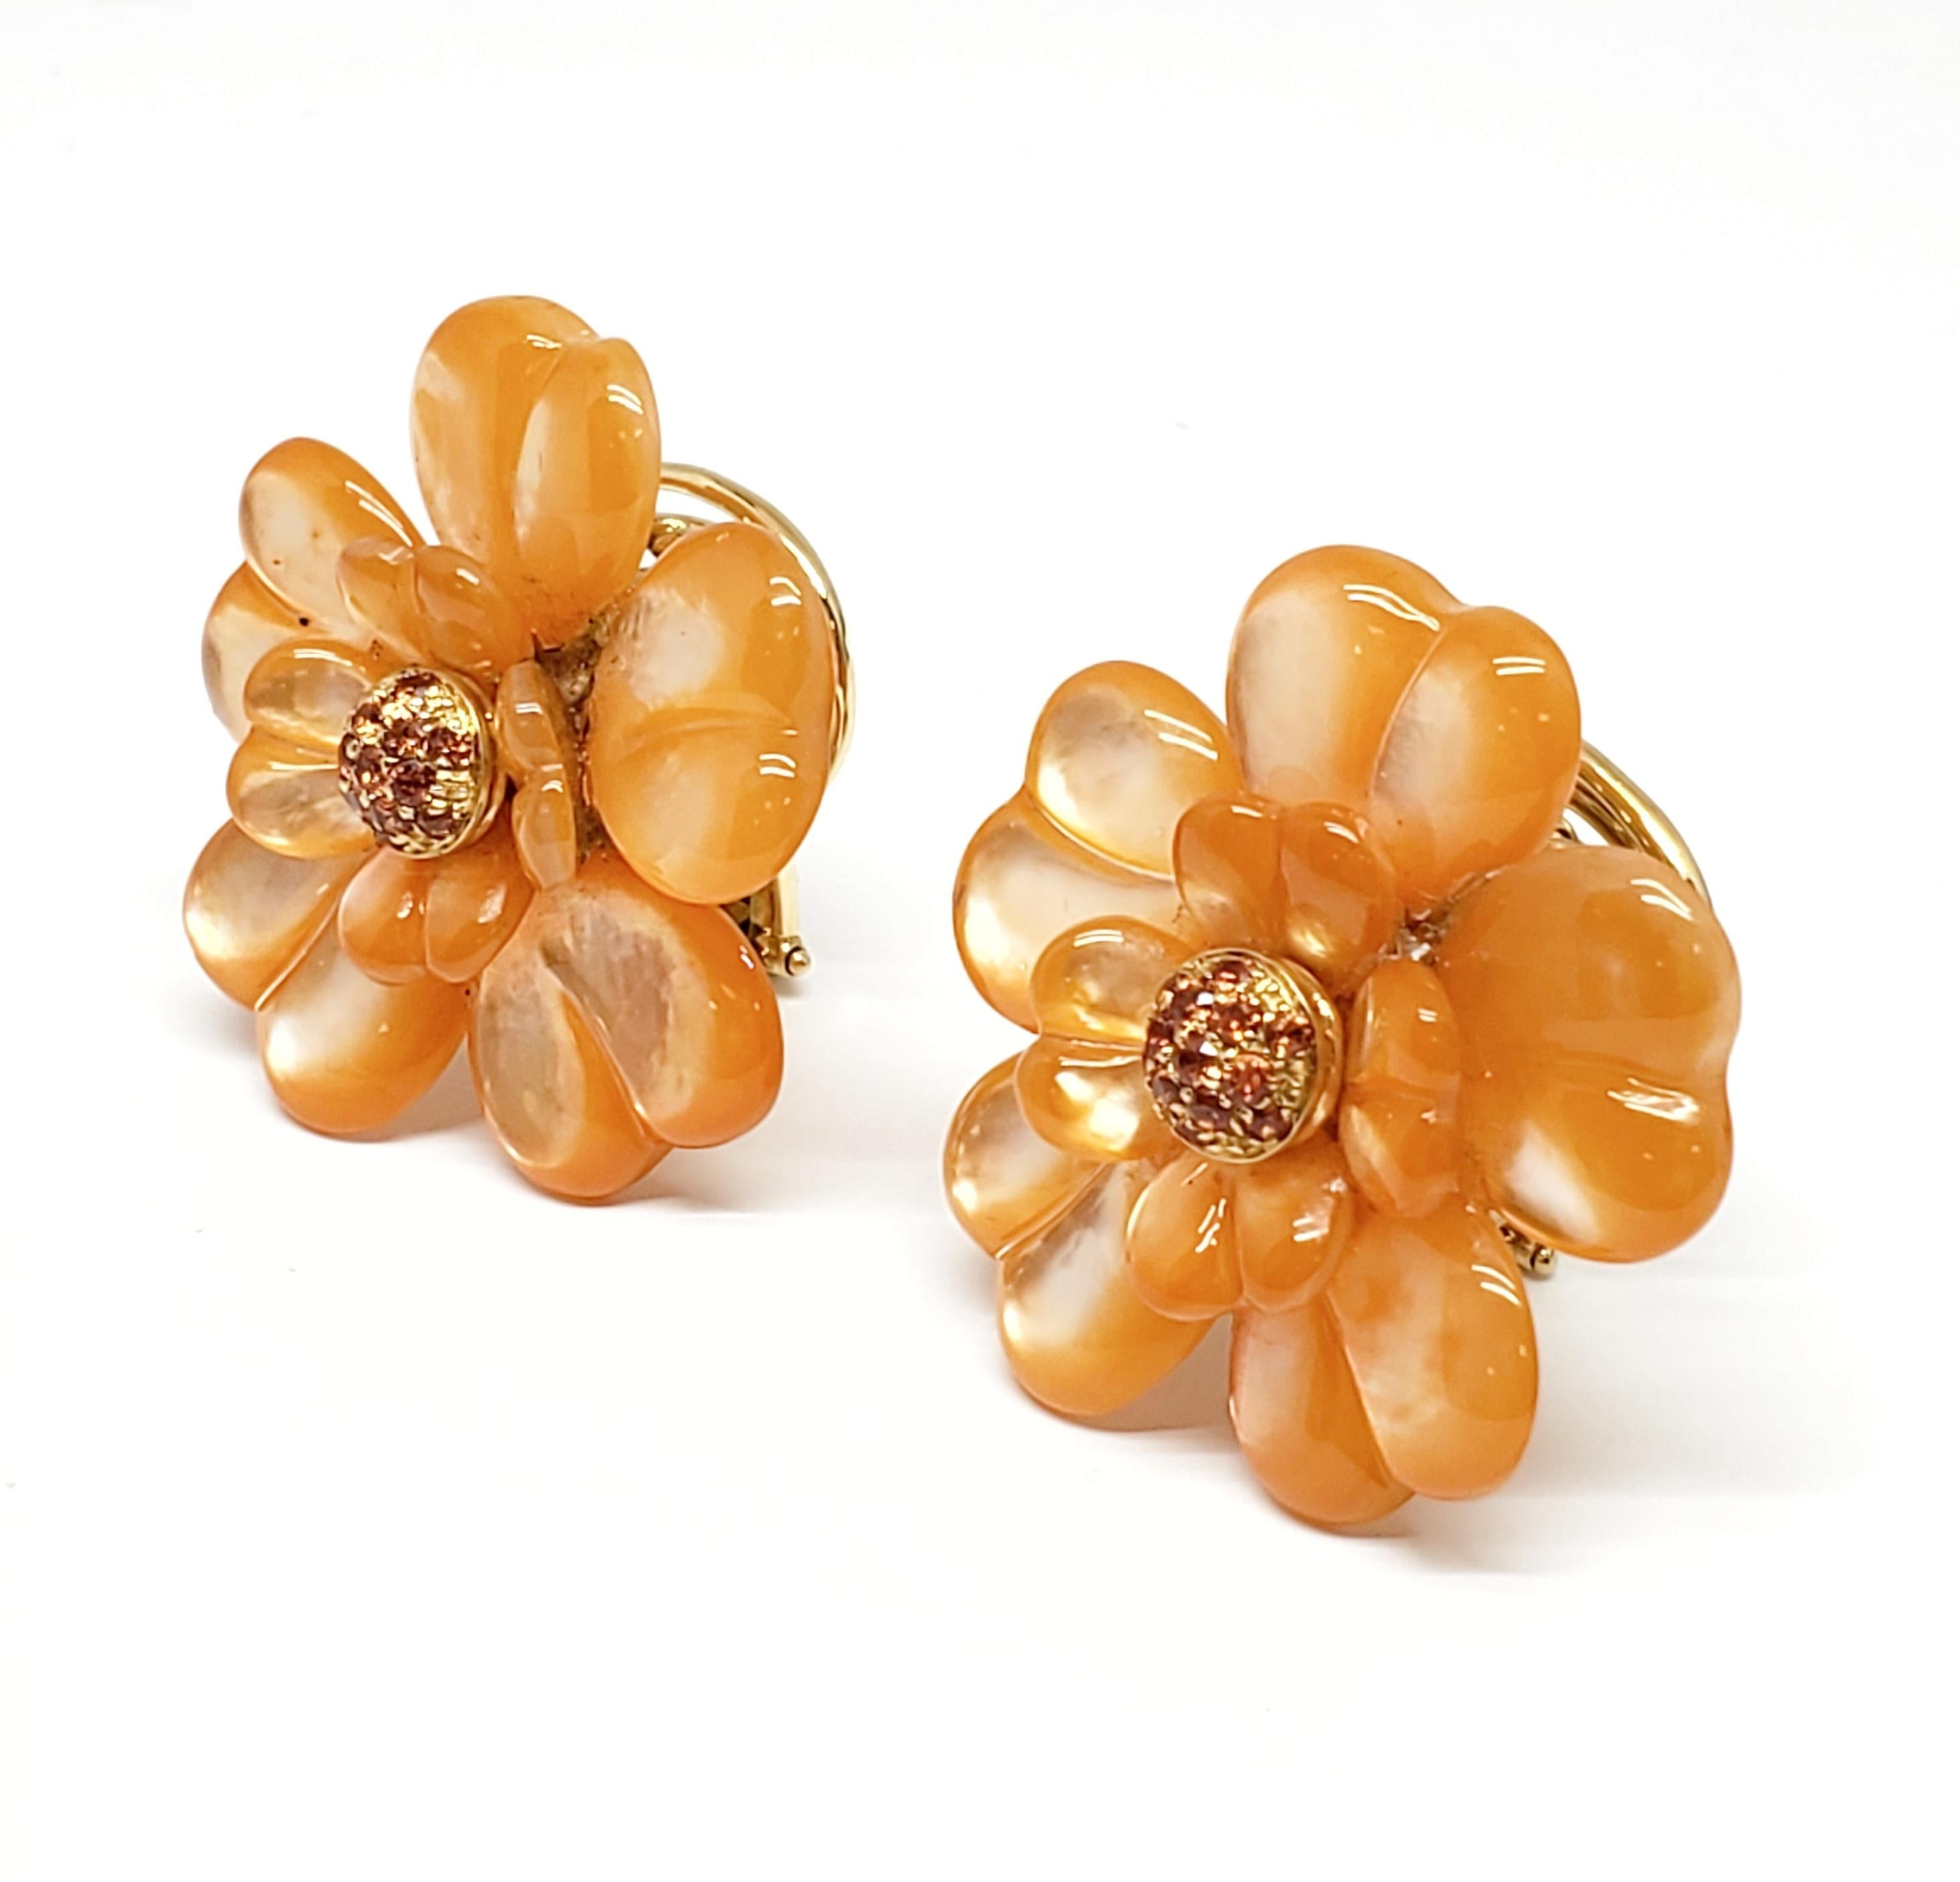 Andreoli Orange Dyed Mother of Pearl Orange Sapphire Cocktail Earrings Clips

These Andreoli Earrings Feature:

0.56 carat round orange sapphires
dyed orange mother of pearl
18.50 grams 18 karat yellow gold

Handcrafted and designed by Andreoli in